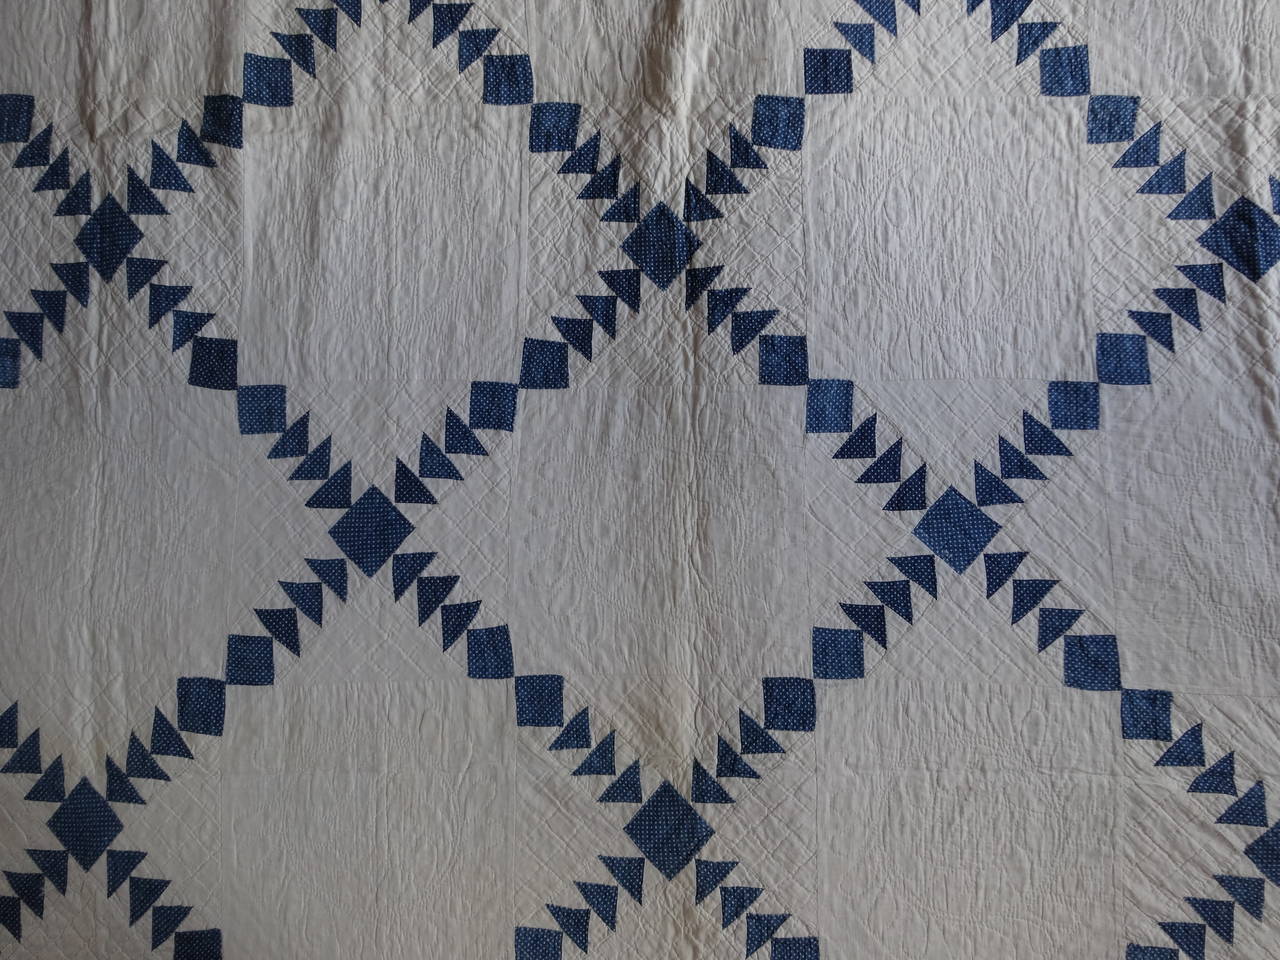 Diamonds in a Wild Geese Sashing Quilt 1